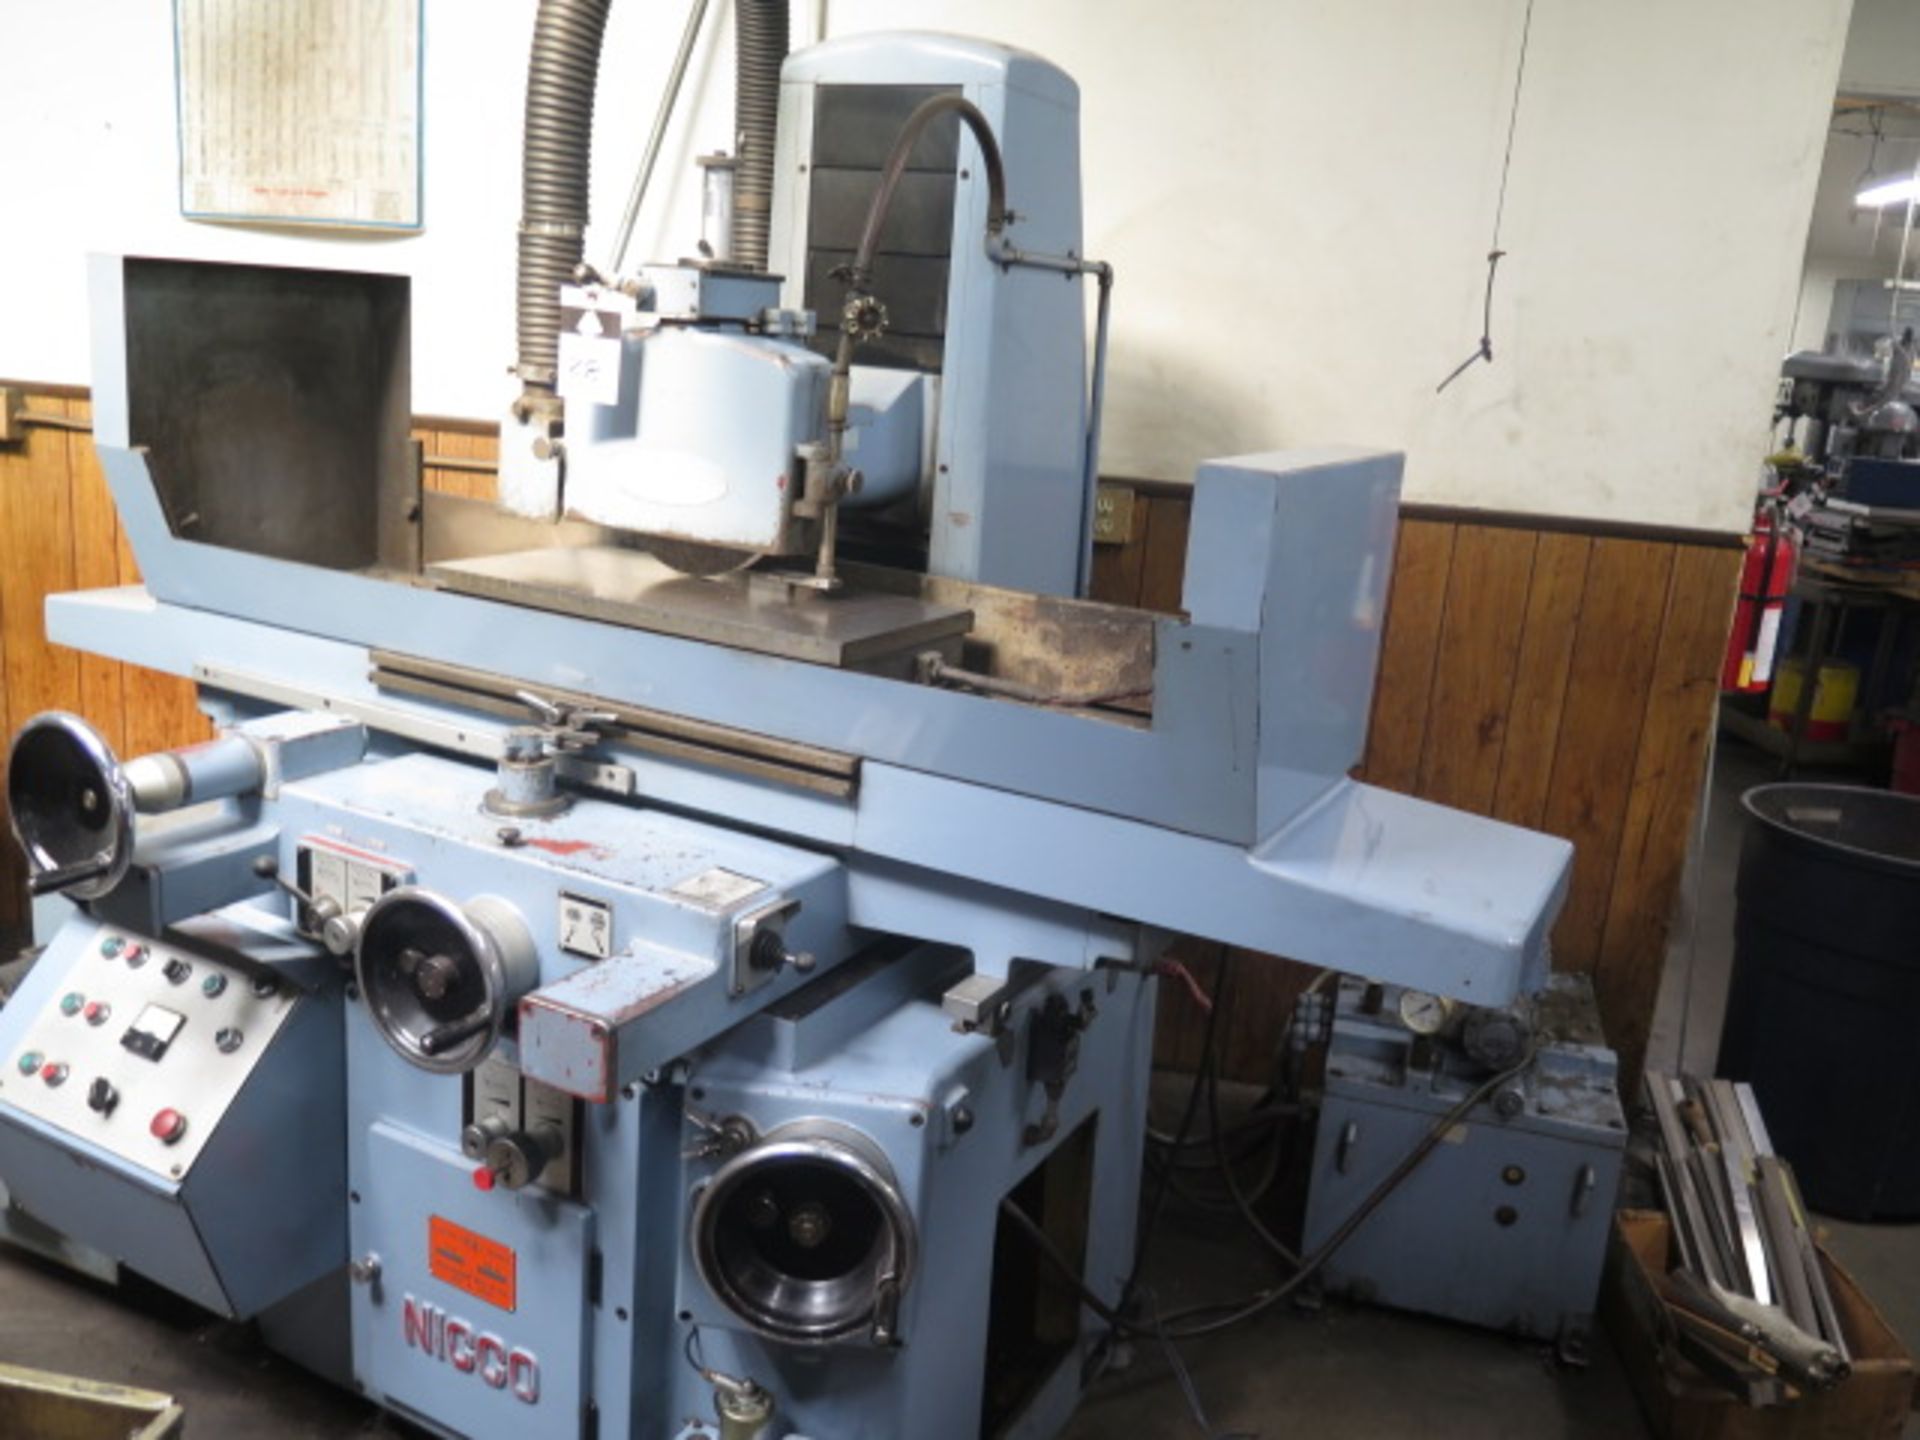 Nicco Type NSG-6H 12” x 24” Automatic Hydraulic Surface Grinder s/n C3406 w/ 12” x 24”, SOLD AS IS - Image 4 of 18